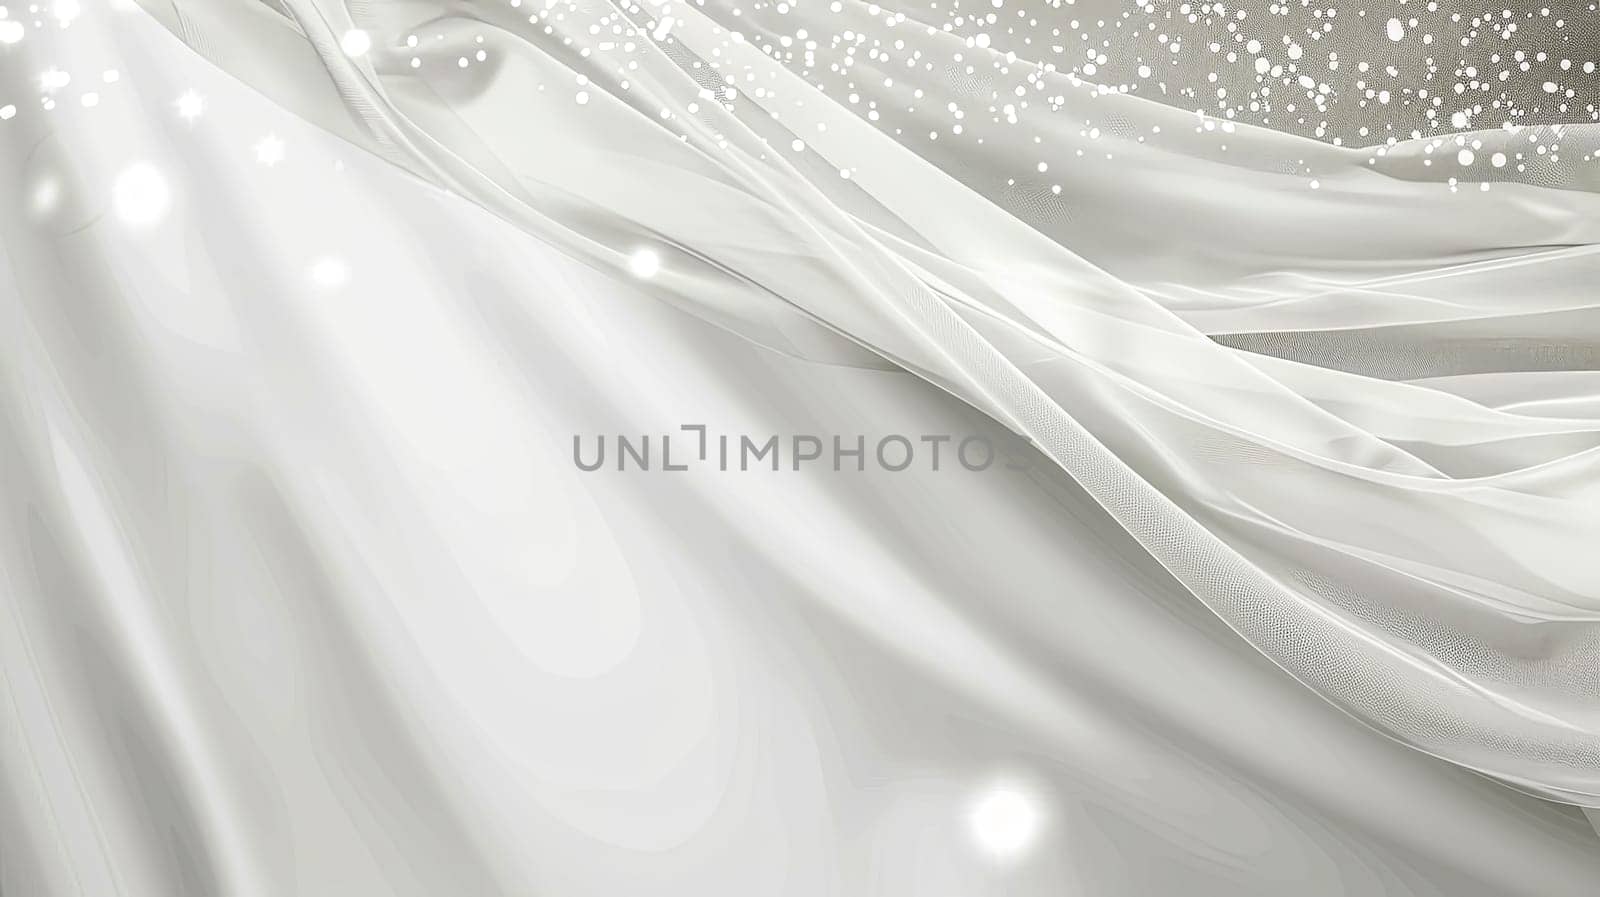 Elegant White Satin Fabric with Sparkling Glitter, copy space